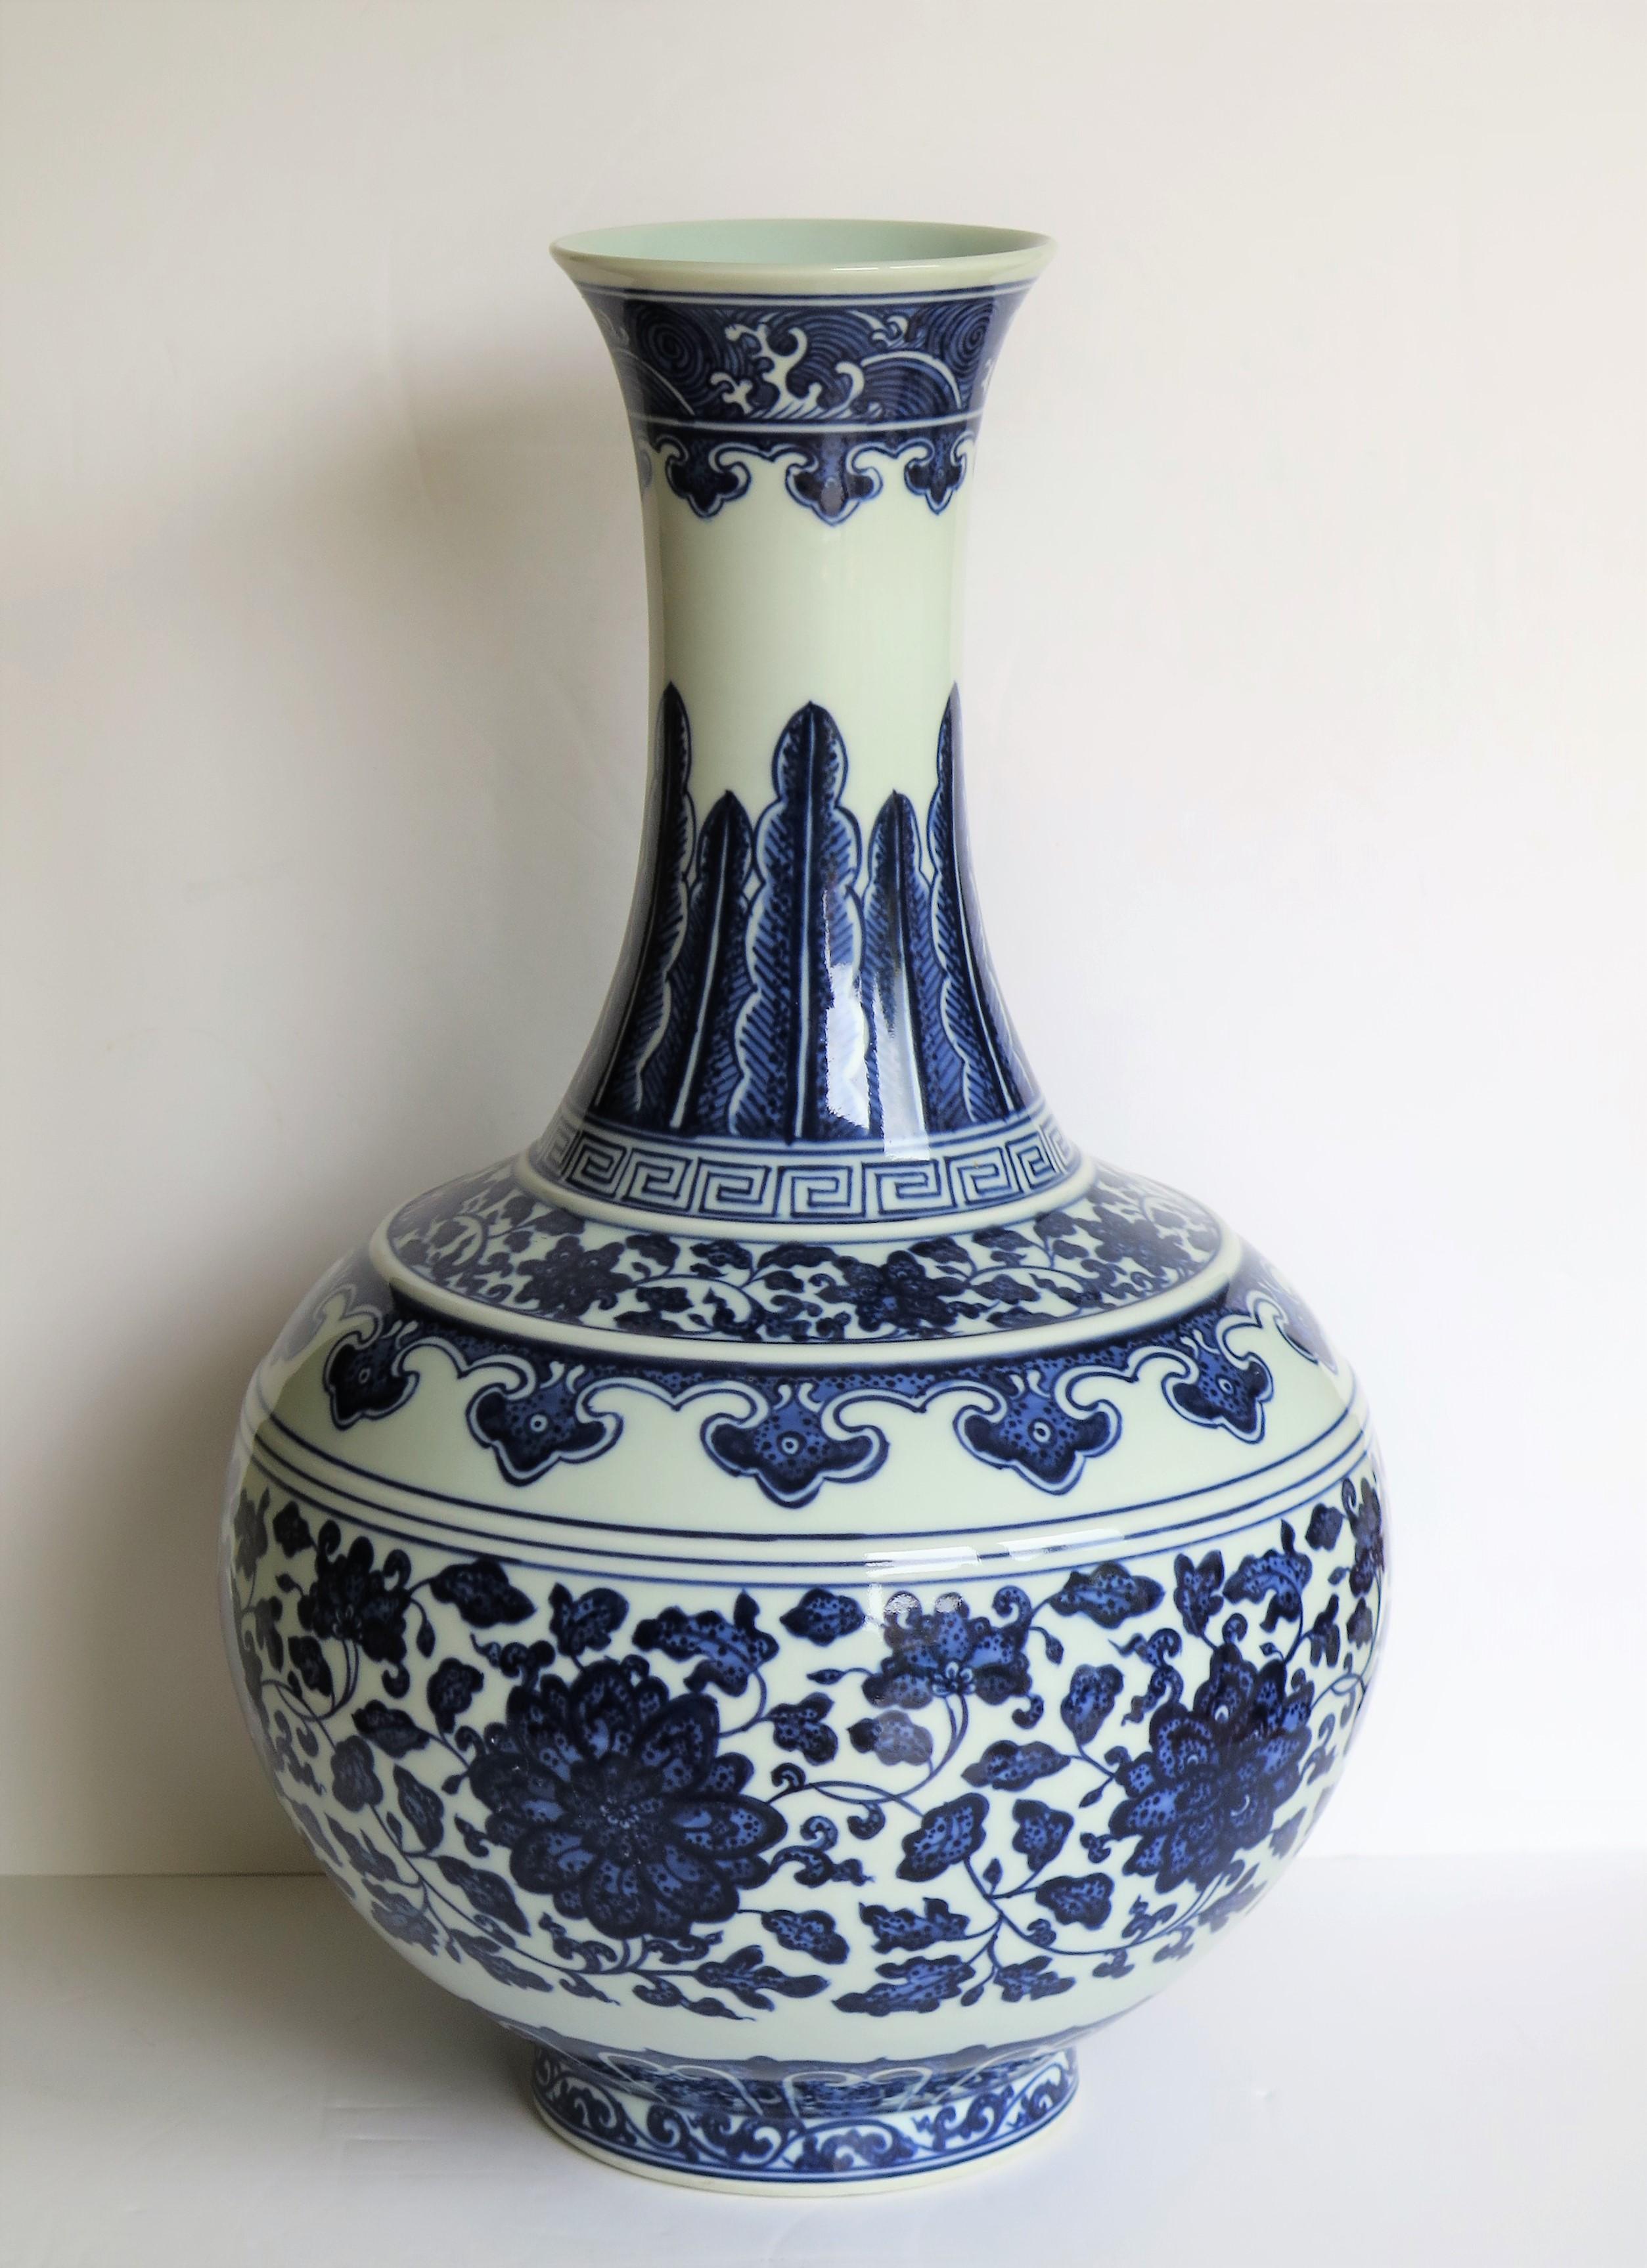 This is a large, elegant porcelain Chinese Export bottle vase, hand painted in a blue and white scrolling peony pattern with a six character seal mark and dating to the mid-20th century.

This bottle vase is very well potted on a low foot with a